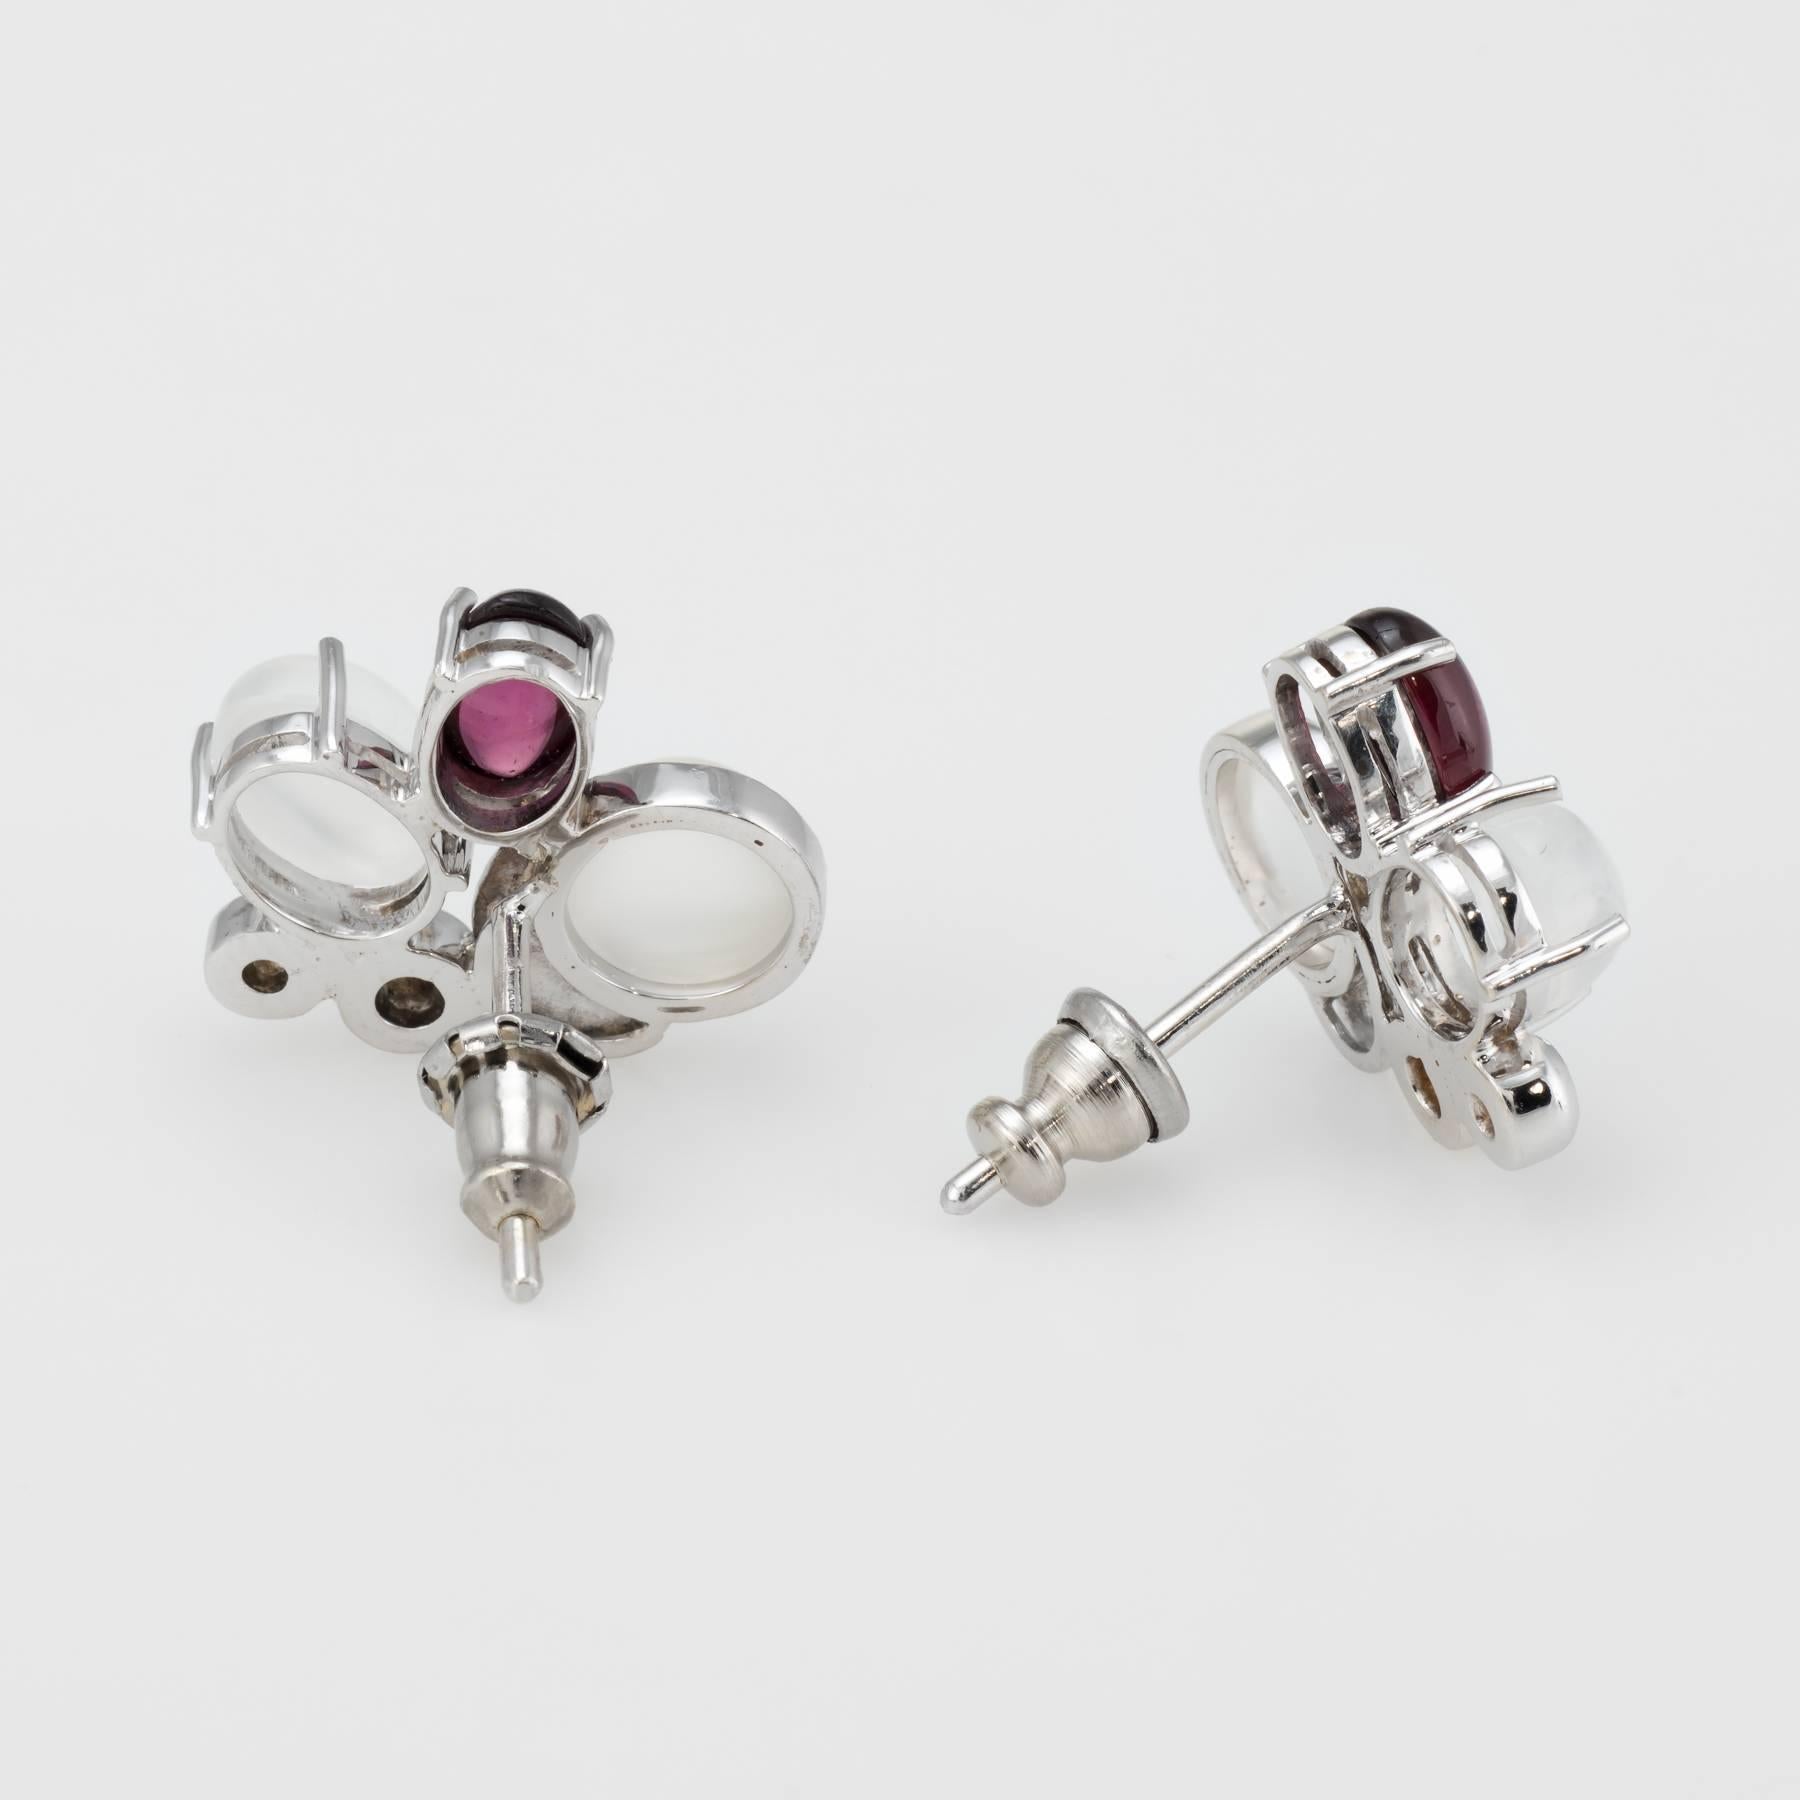 Elegant pair of gemstone cluster earrings, crafted in 14k white gold. 

Moonstone measures 7mm x 5mm and 6mm (3.50 carats total estimated weight), accented with 6mm x 4mm cabochon cut rhodolite garnets (estimated at 0.80 carats). The diamonds total